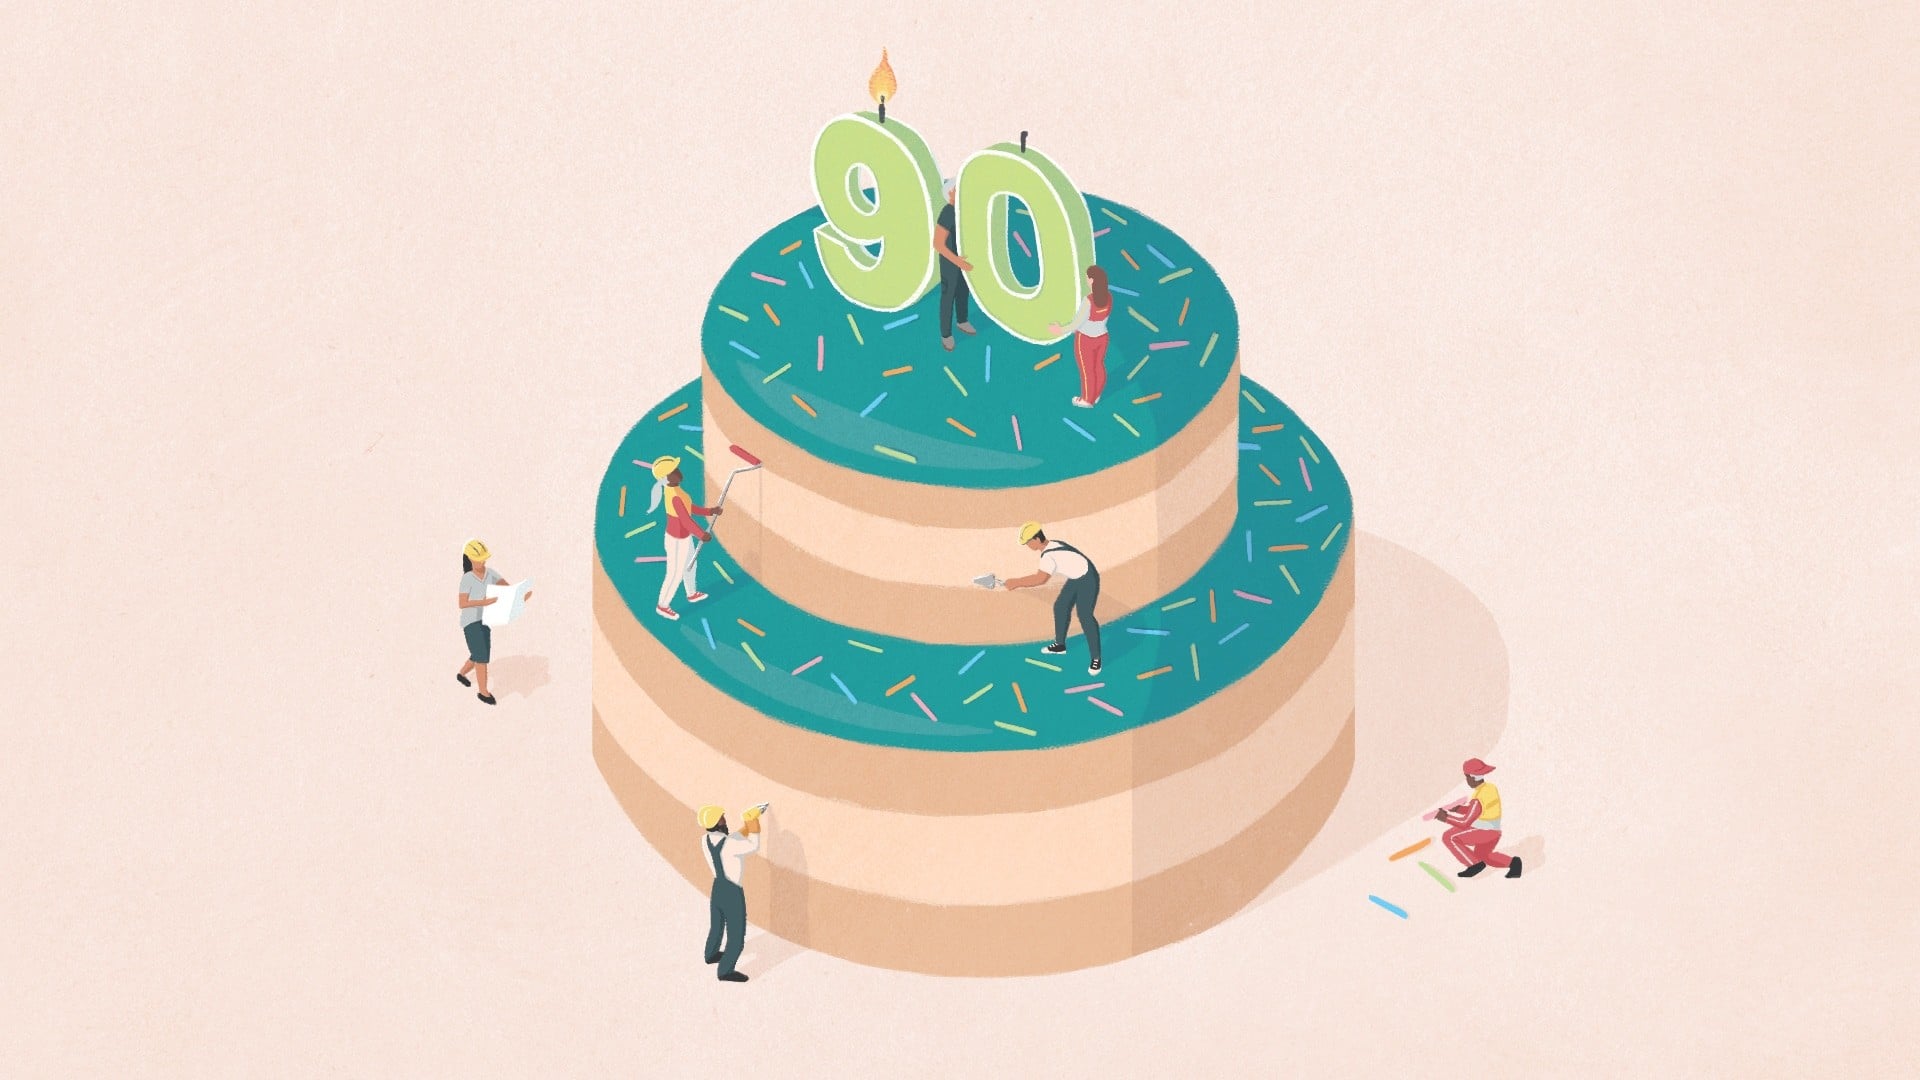 Illustration of 90's birthday cake surrounded by people